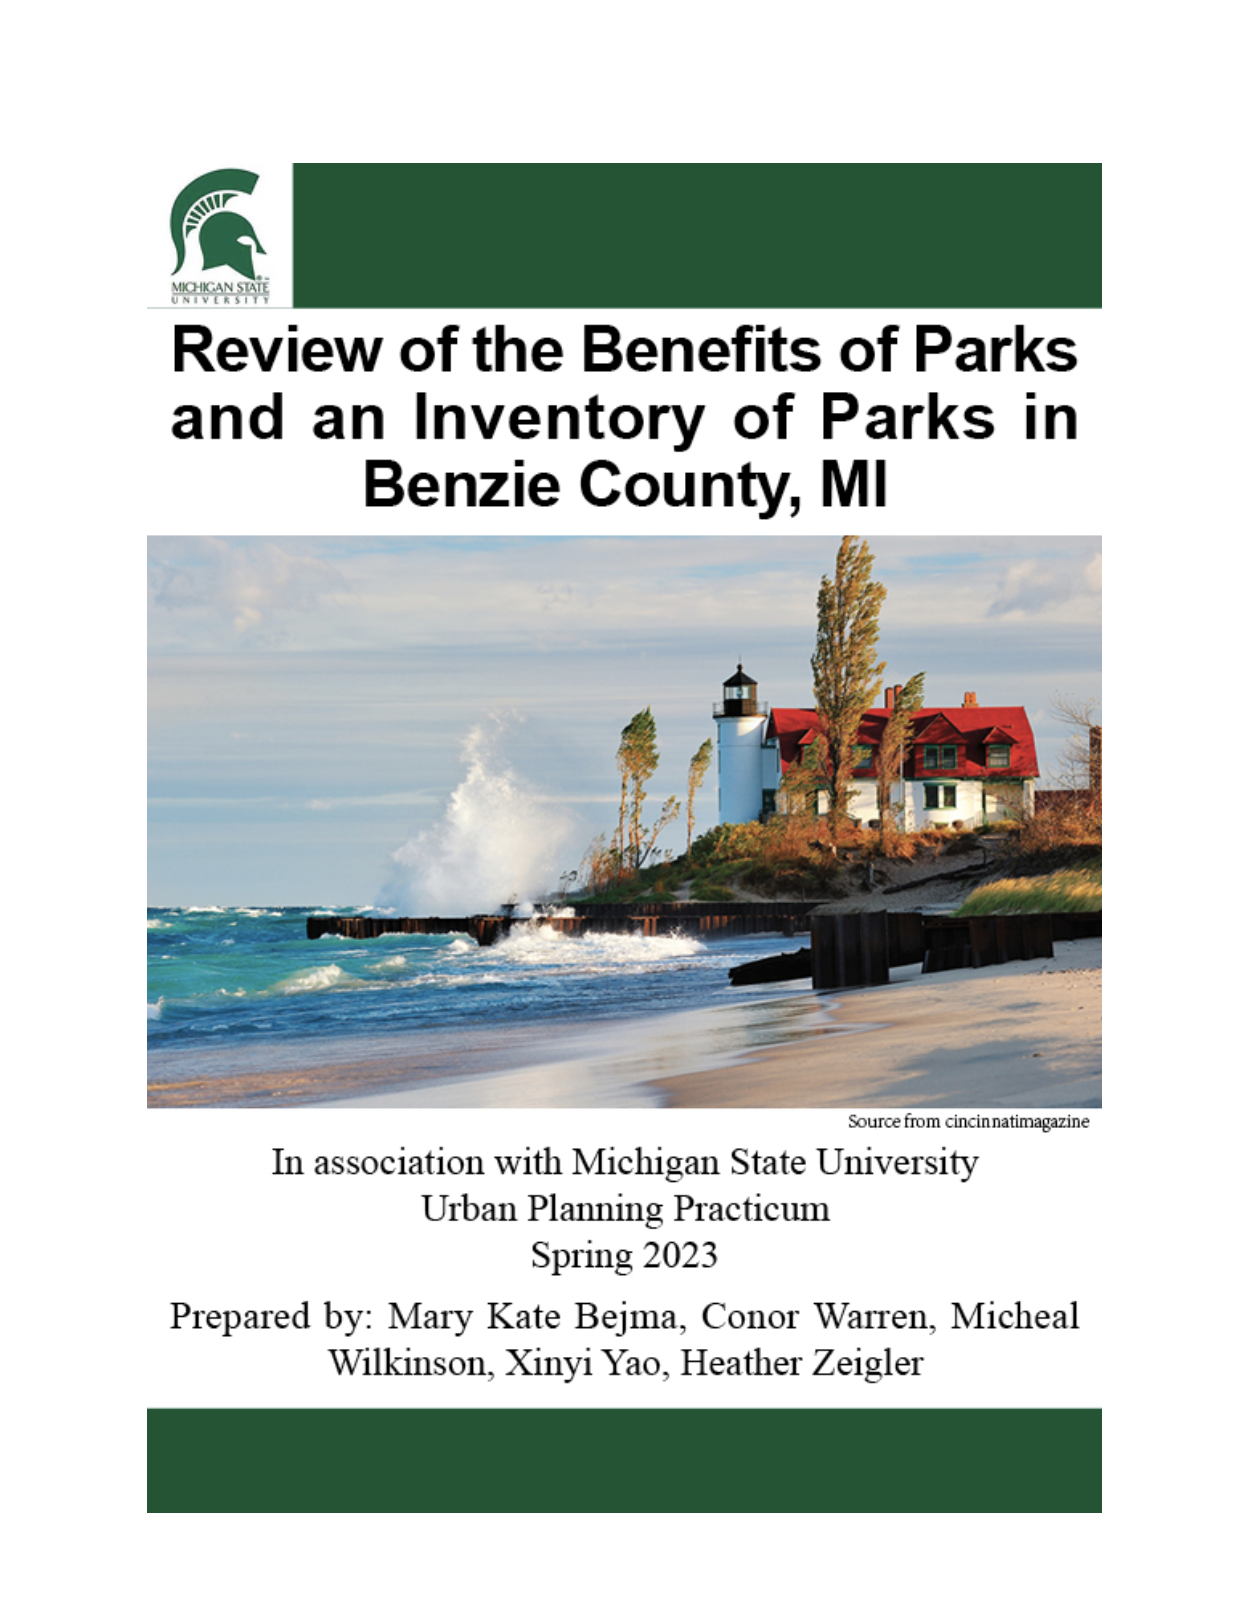                      2023: Review of the Benefits of Parks and an Inventory of Parks in Benzie County, MI Report